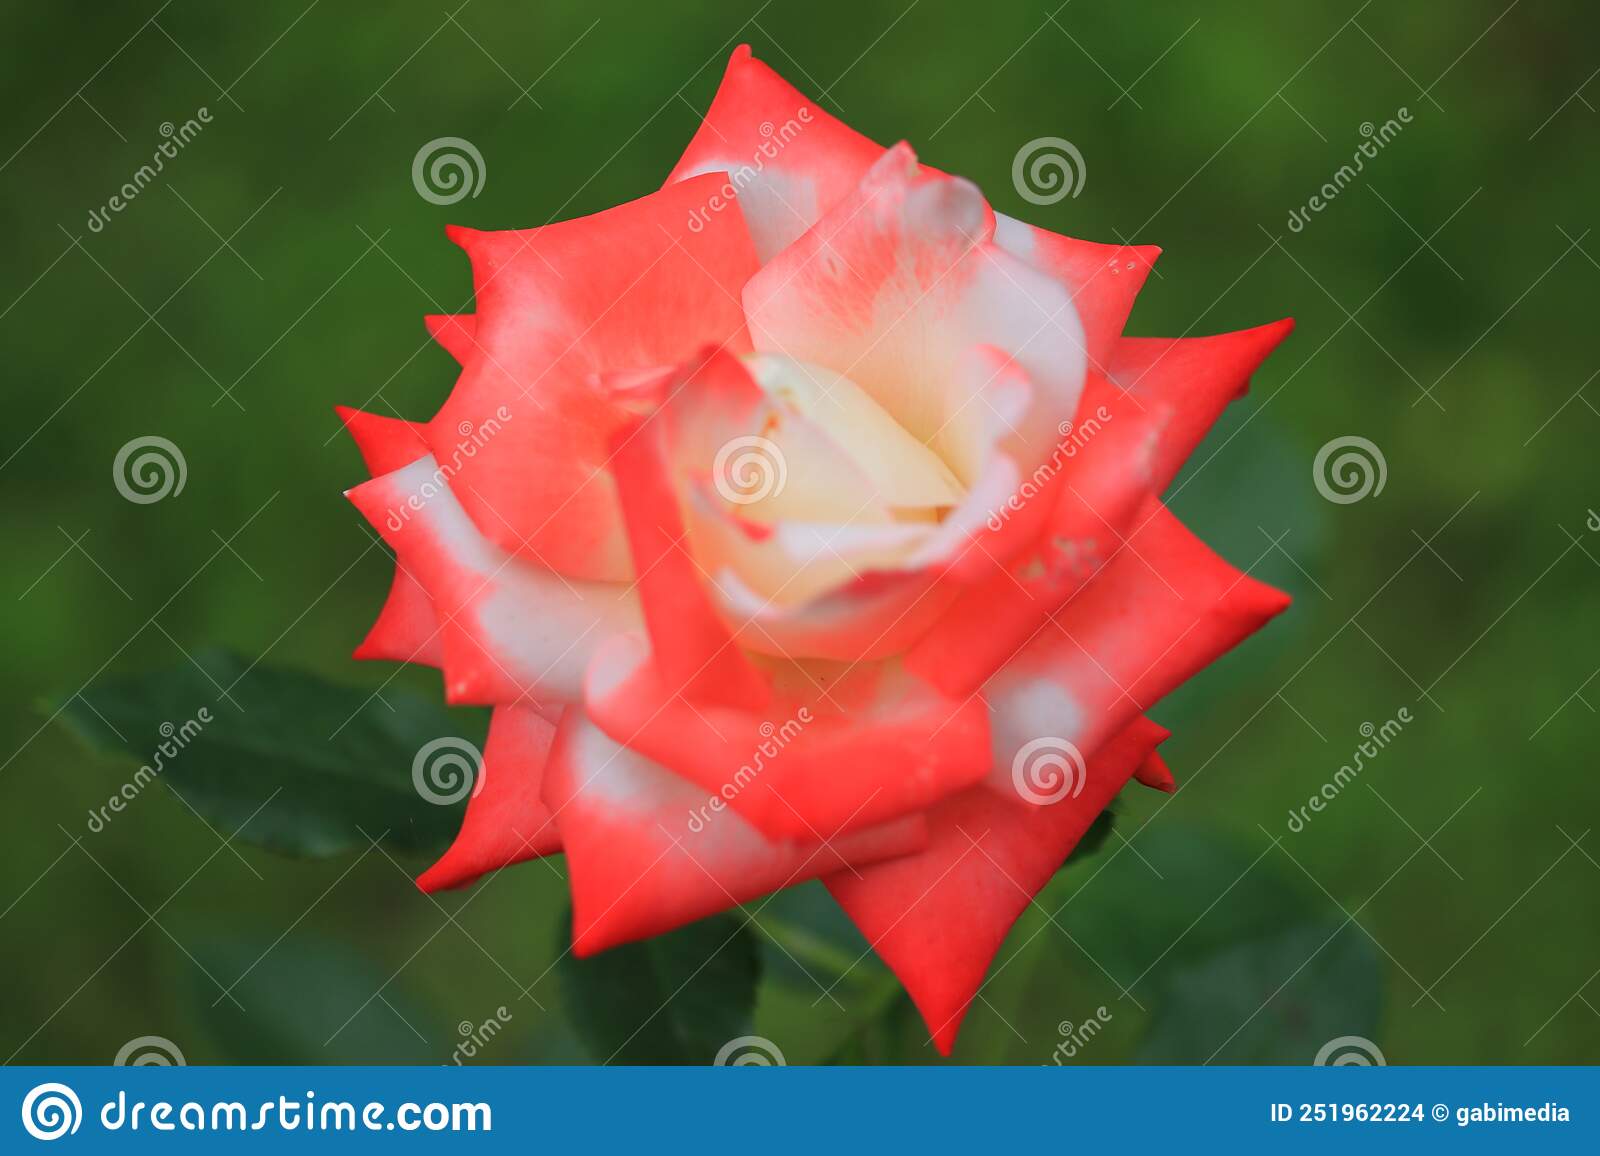 Red and white rose flower on blurred background